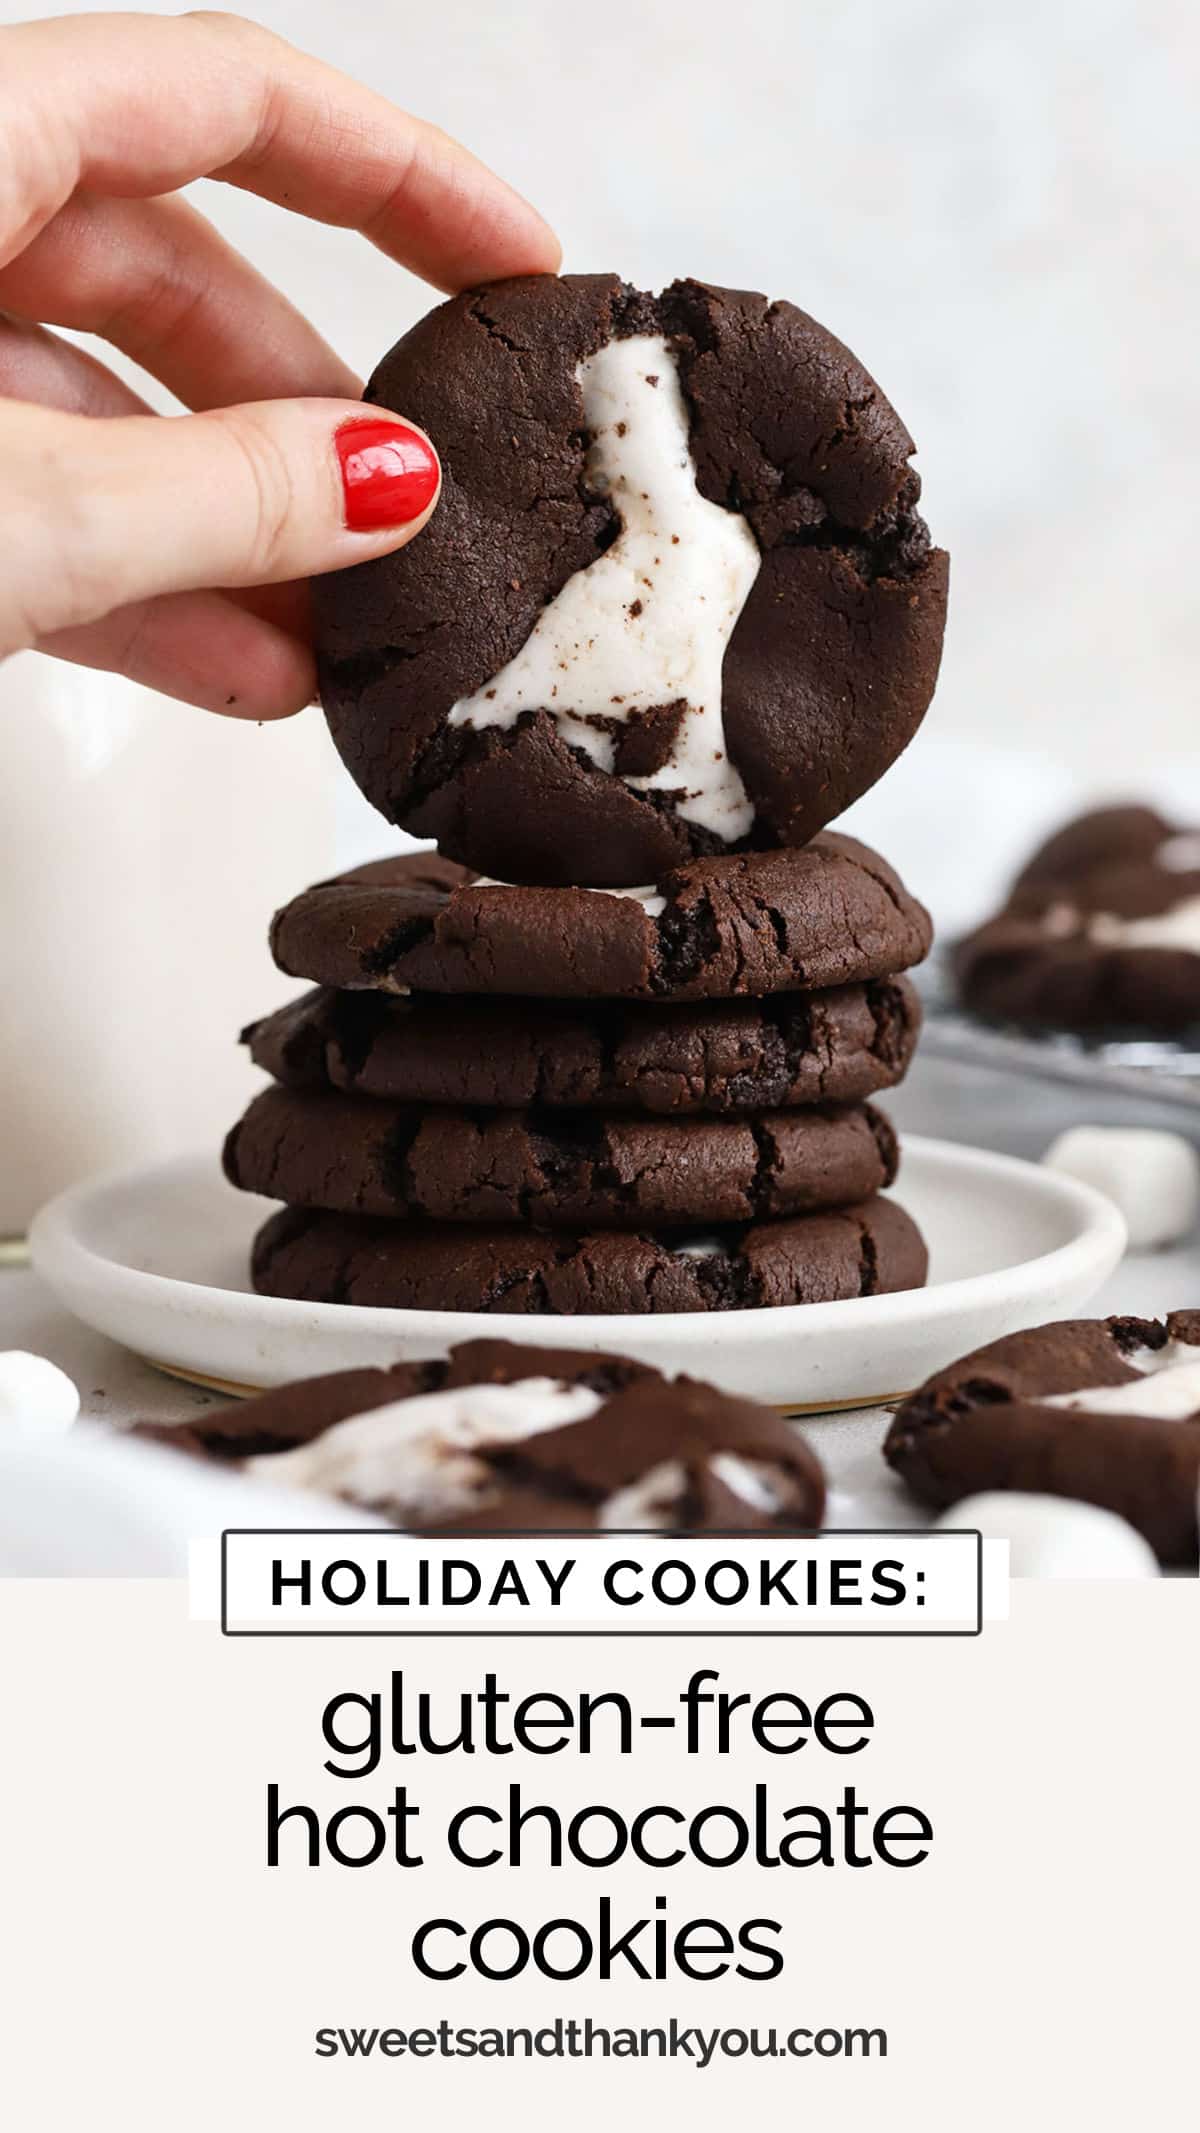 These Gluten-Free Hot Chocolate Cookies taste like a warm cup of hot cocoa in cookie form! Made with fudgy chocolate cookies and a gooey marshmallow center, they're a perfect gluten-free holiday cookie recipe. They look adorable for a gluten-free cookie exchange or holiday cookie plate! / gluten-free hot cocoa cookies / gluten-free holiday cookies